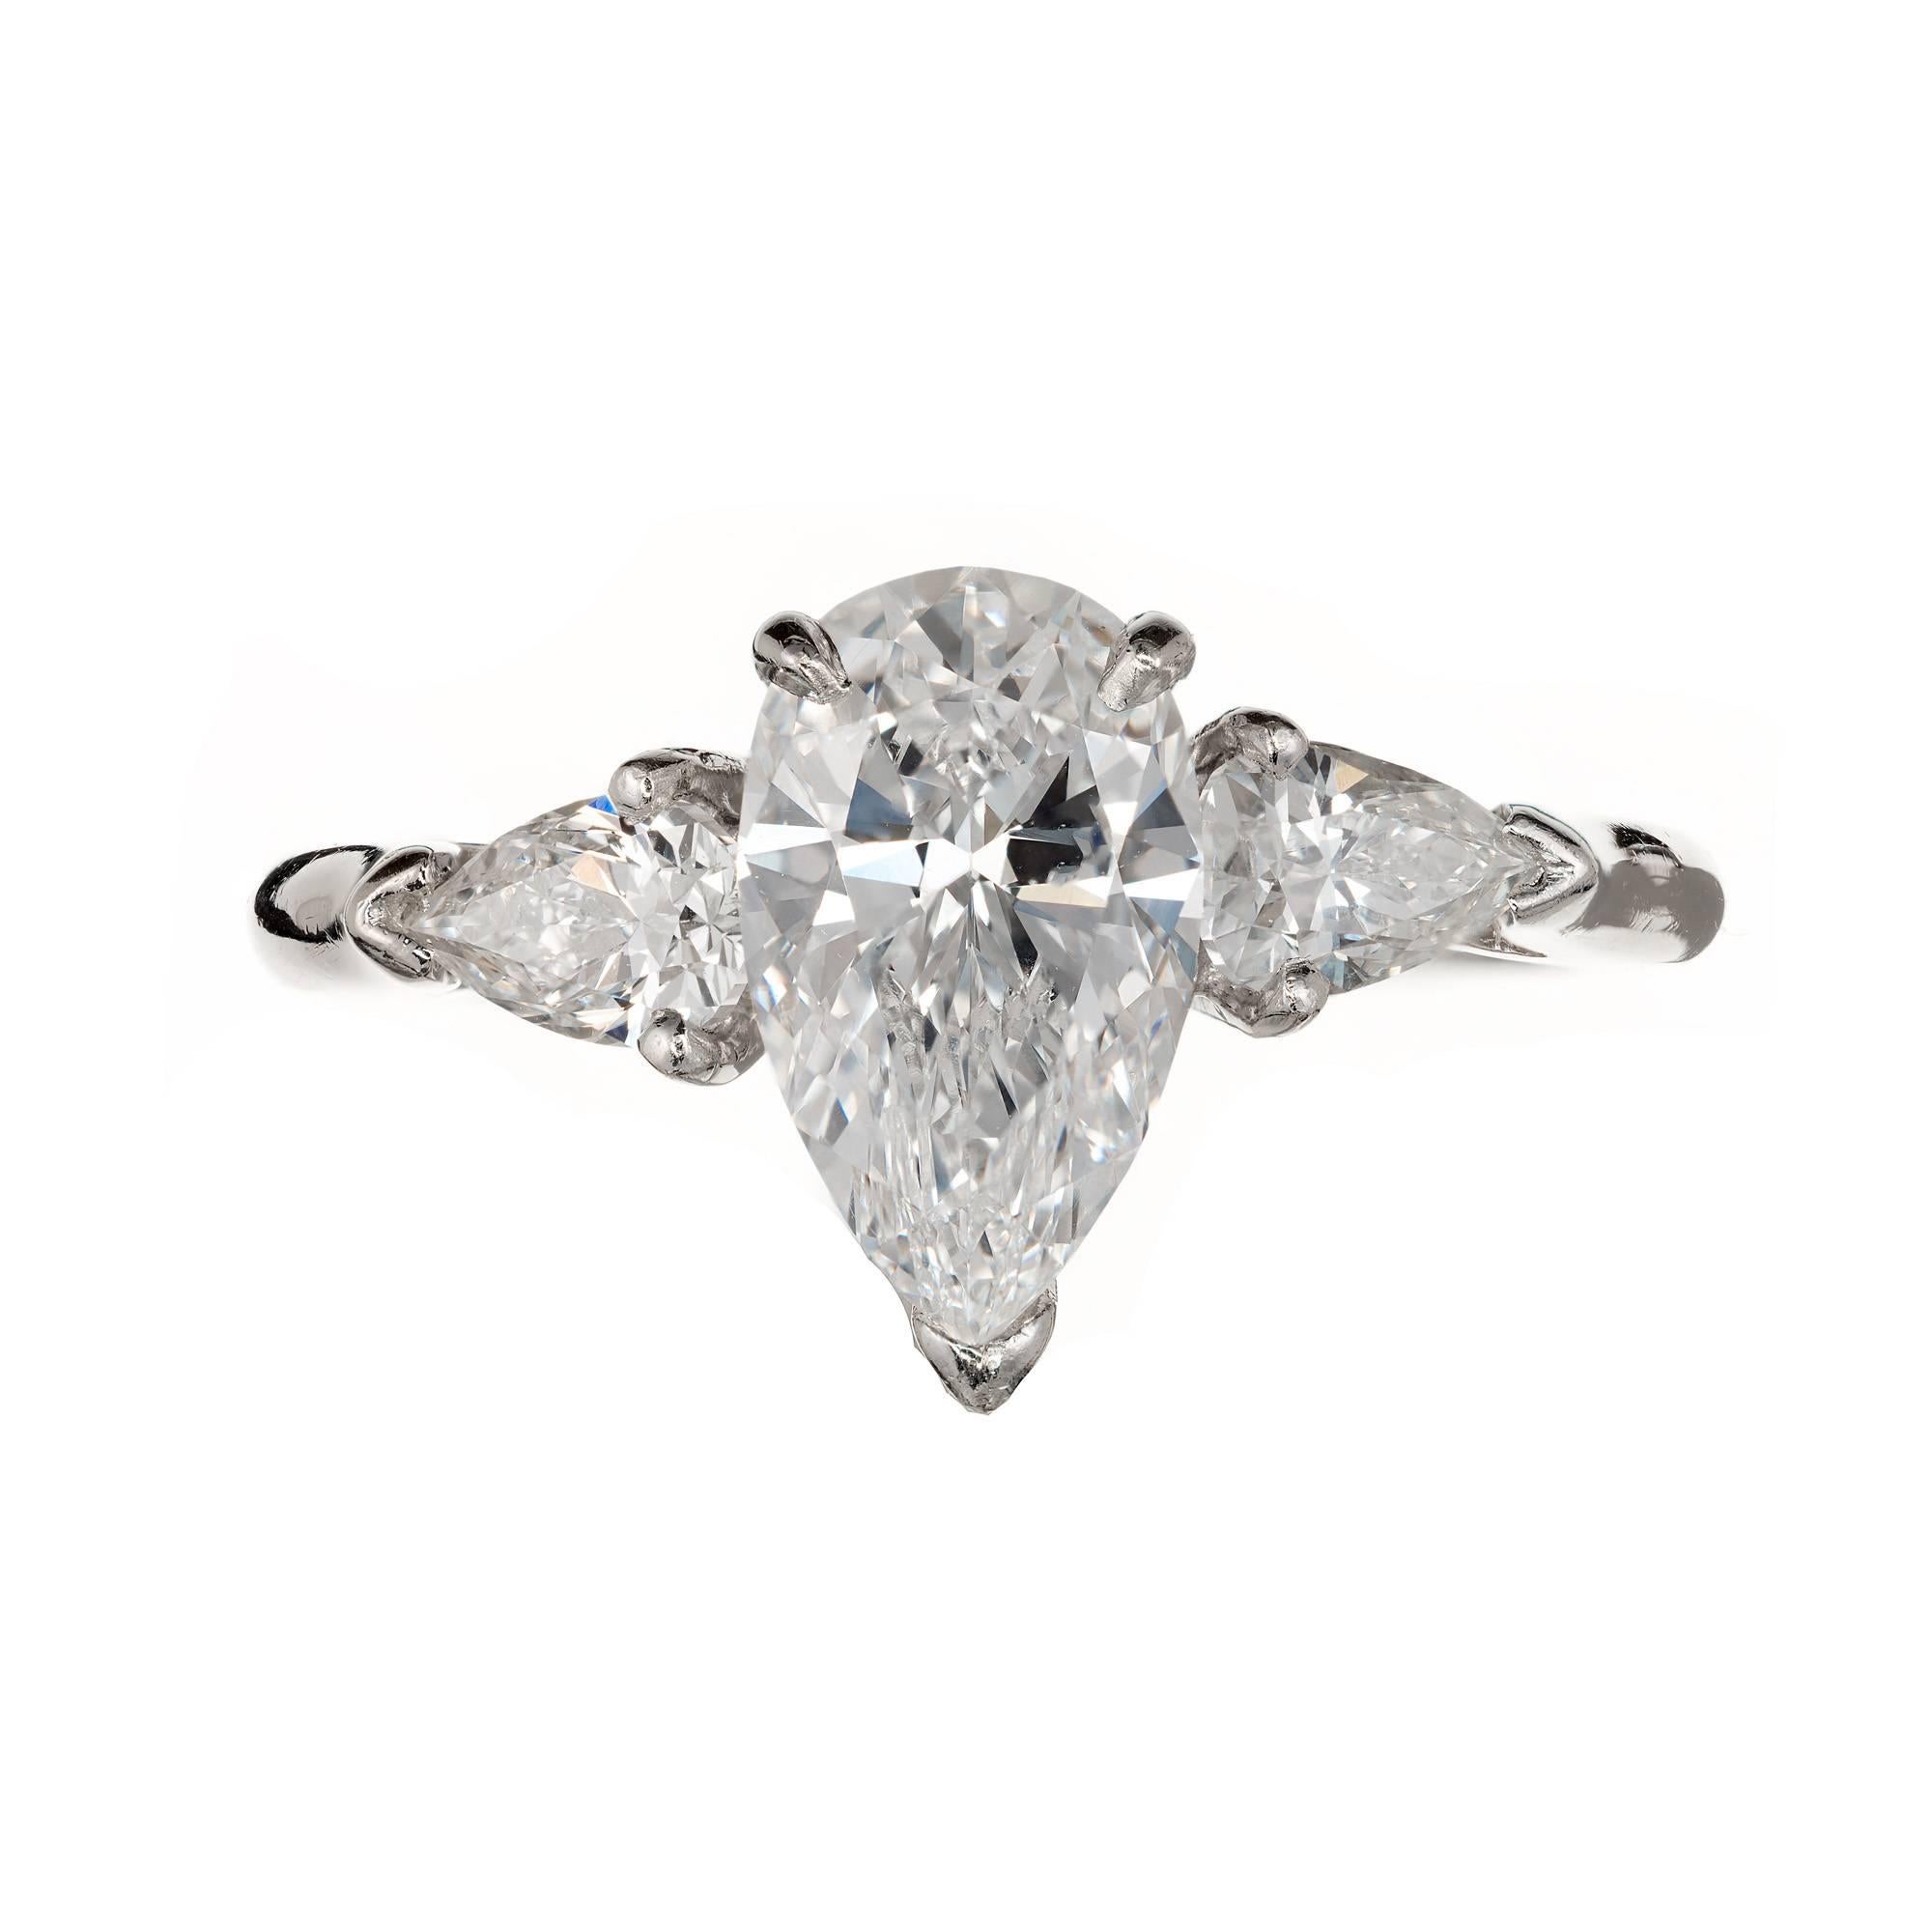 Pear shaped diamond Handmade Platinum three-stone engagement ring. Pear shape diamond, 1.63cts, with two pear shaped side stones . 

1 pear shape GIA certified #15318446 1.63ct F, VS2  62.1%depth, 60% table
2 pear shape side diamonds approx. total